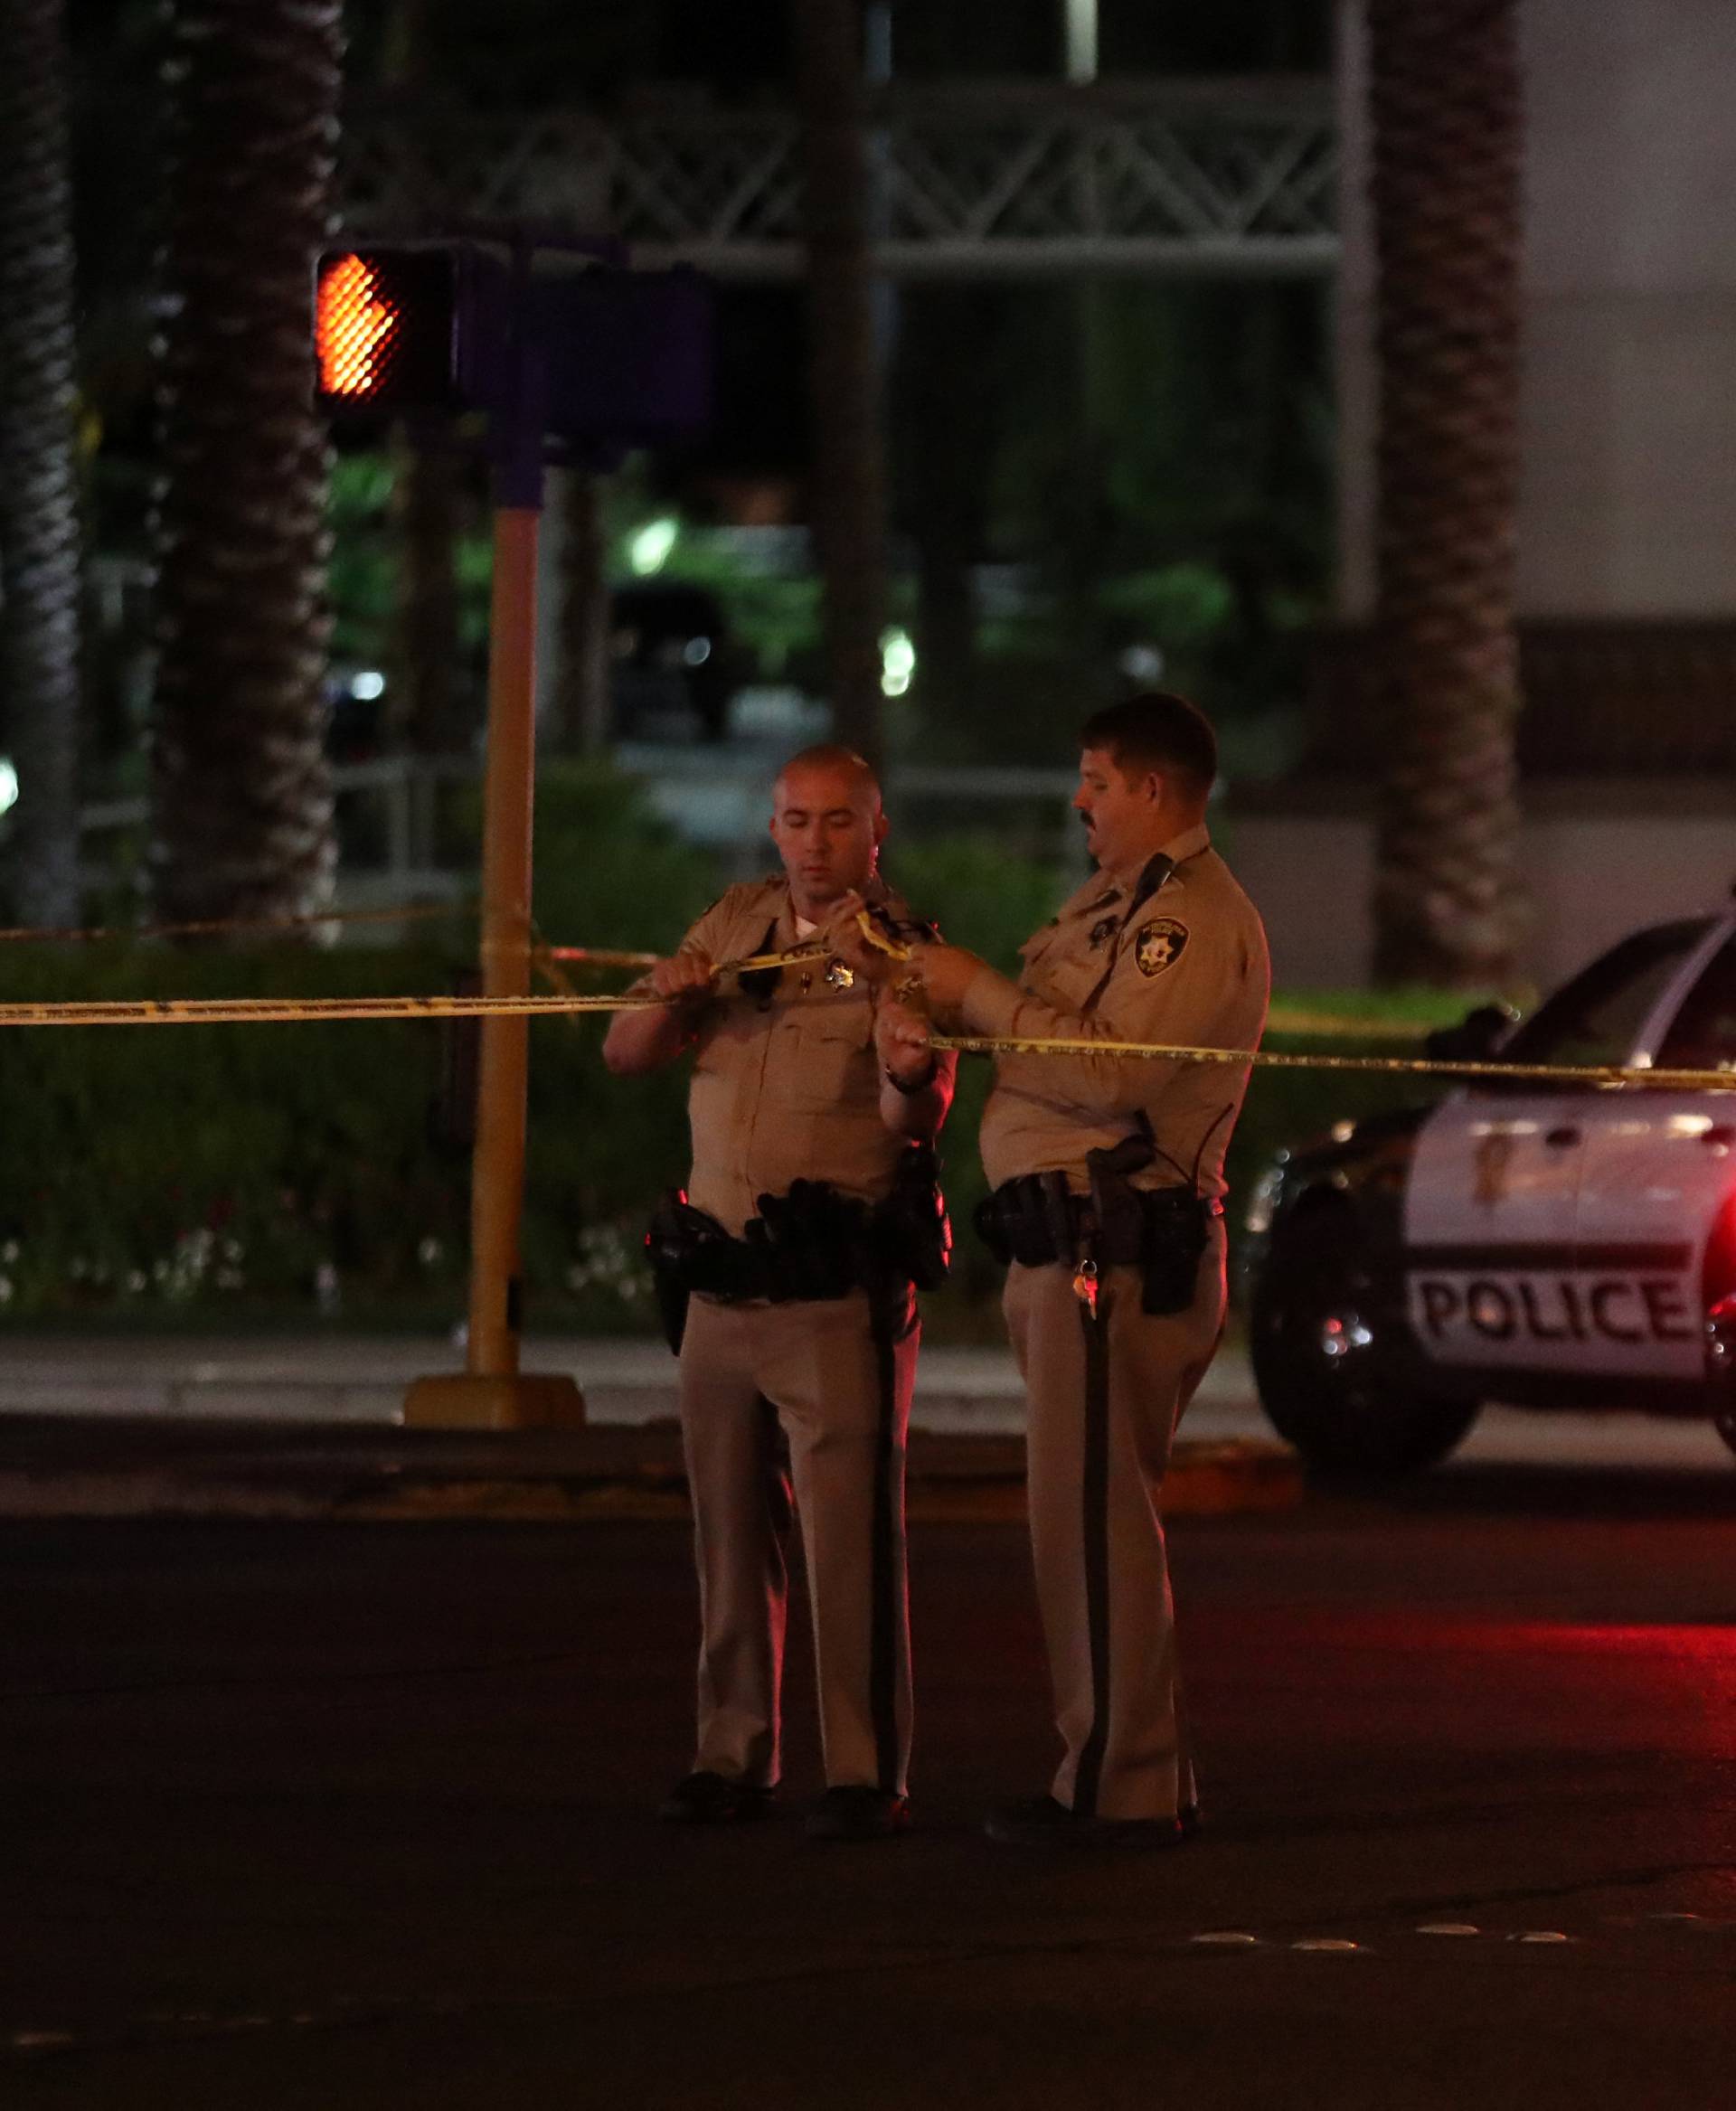 Police continue to keep a section of Las Vegas Boulevard closed as they work the crime scene following a mass shooing att he Route 91 Harvest Country Music Festival in Las Vegas, Nevada